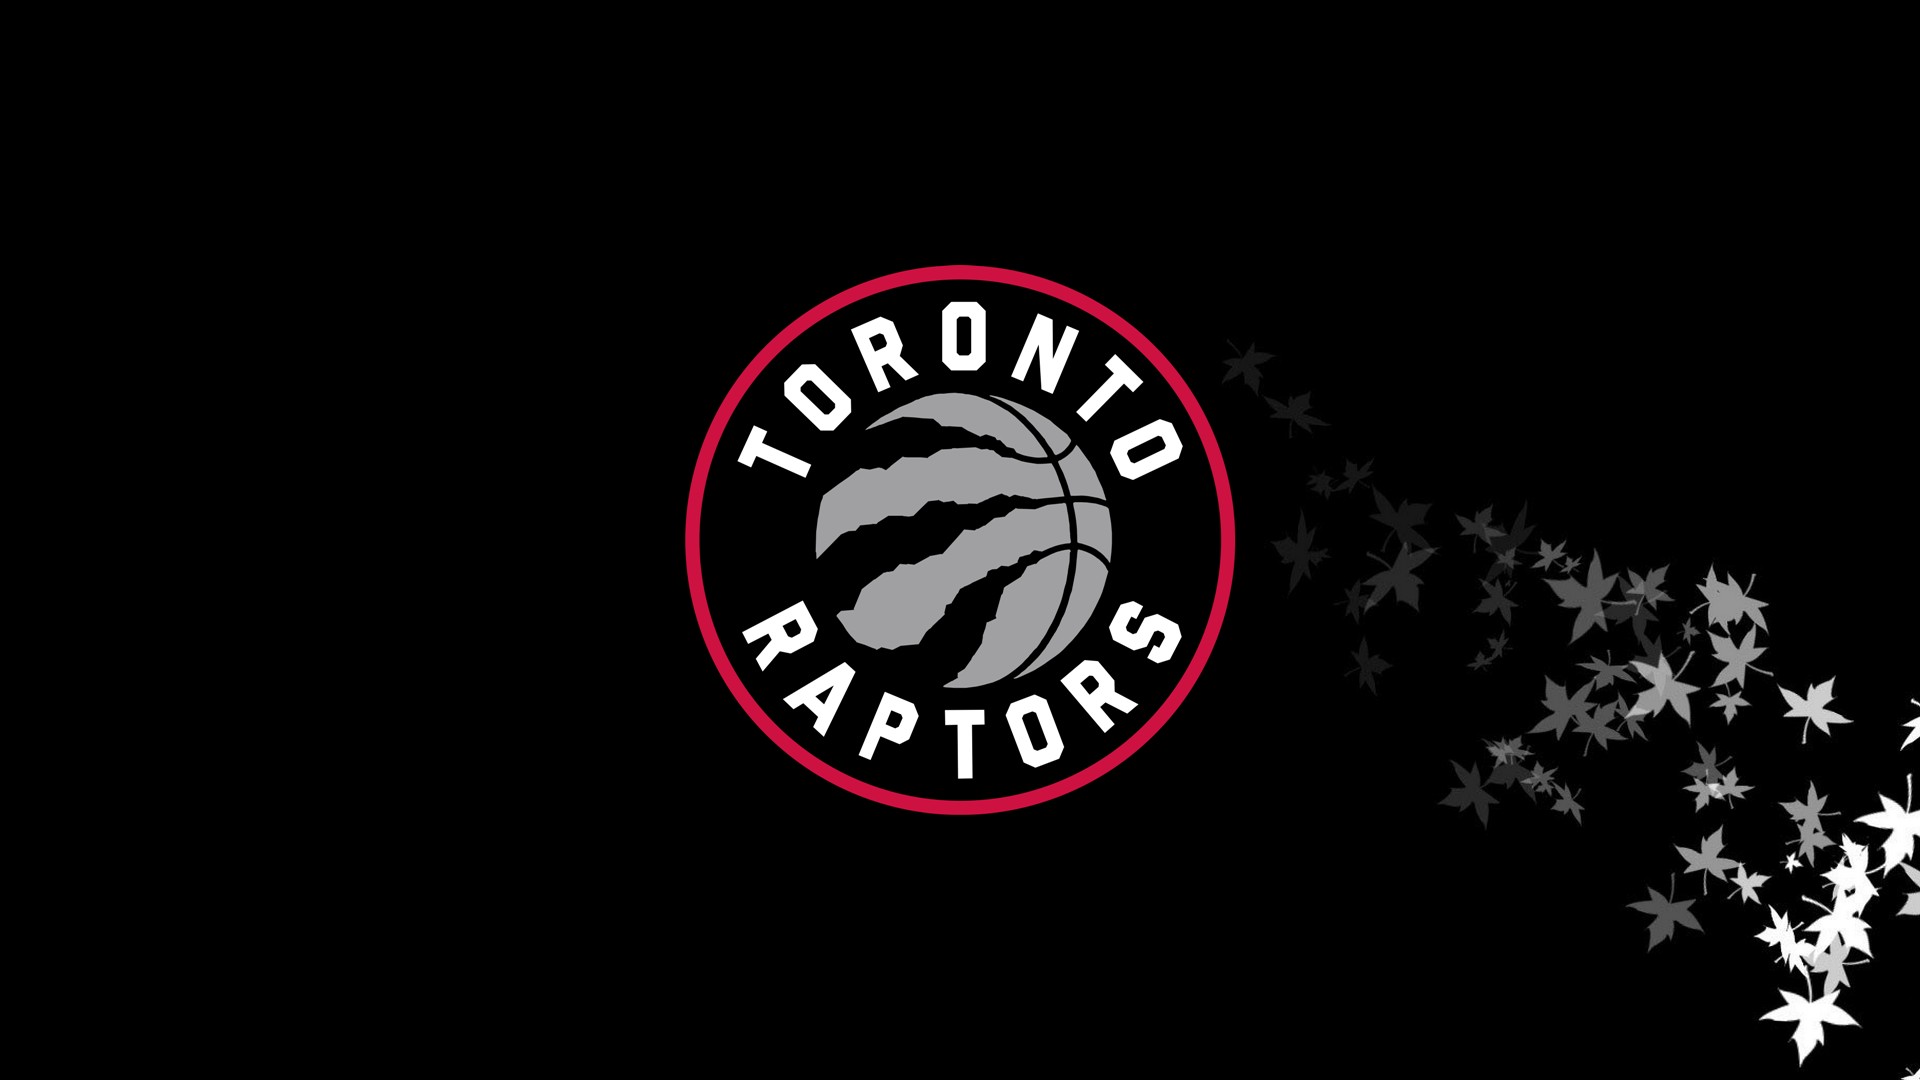 Wallpapers HD Raptors Basketball with image dimensions 1920x1080 pixel. You can make this wallpaper for your Desktop Computer Backgrounds, Windows or Mac Screensavers, iPhone Lock screen, Tablet or Android and another Mobile Phone device